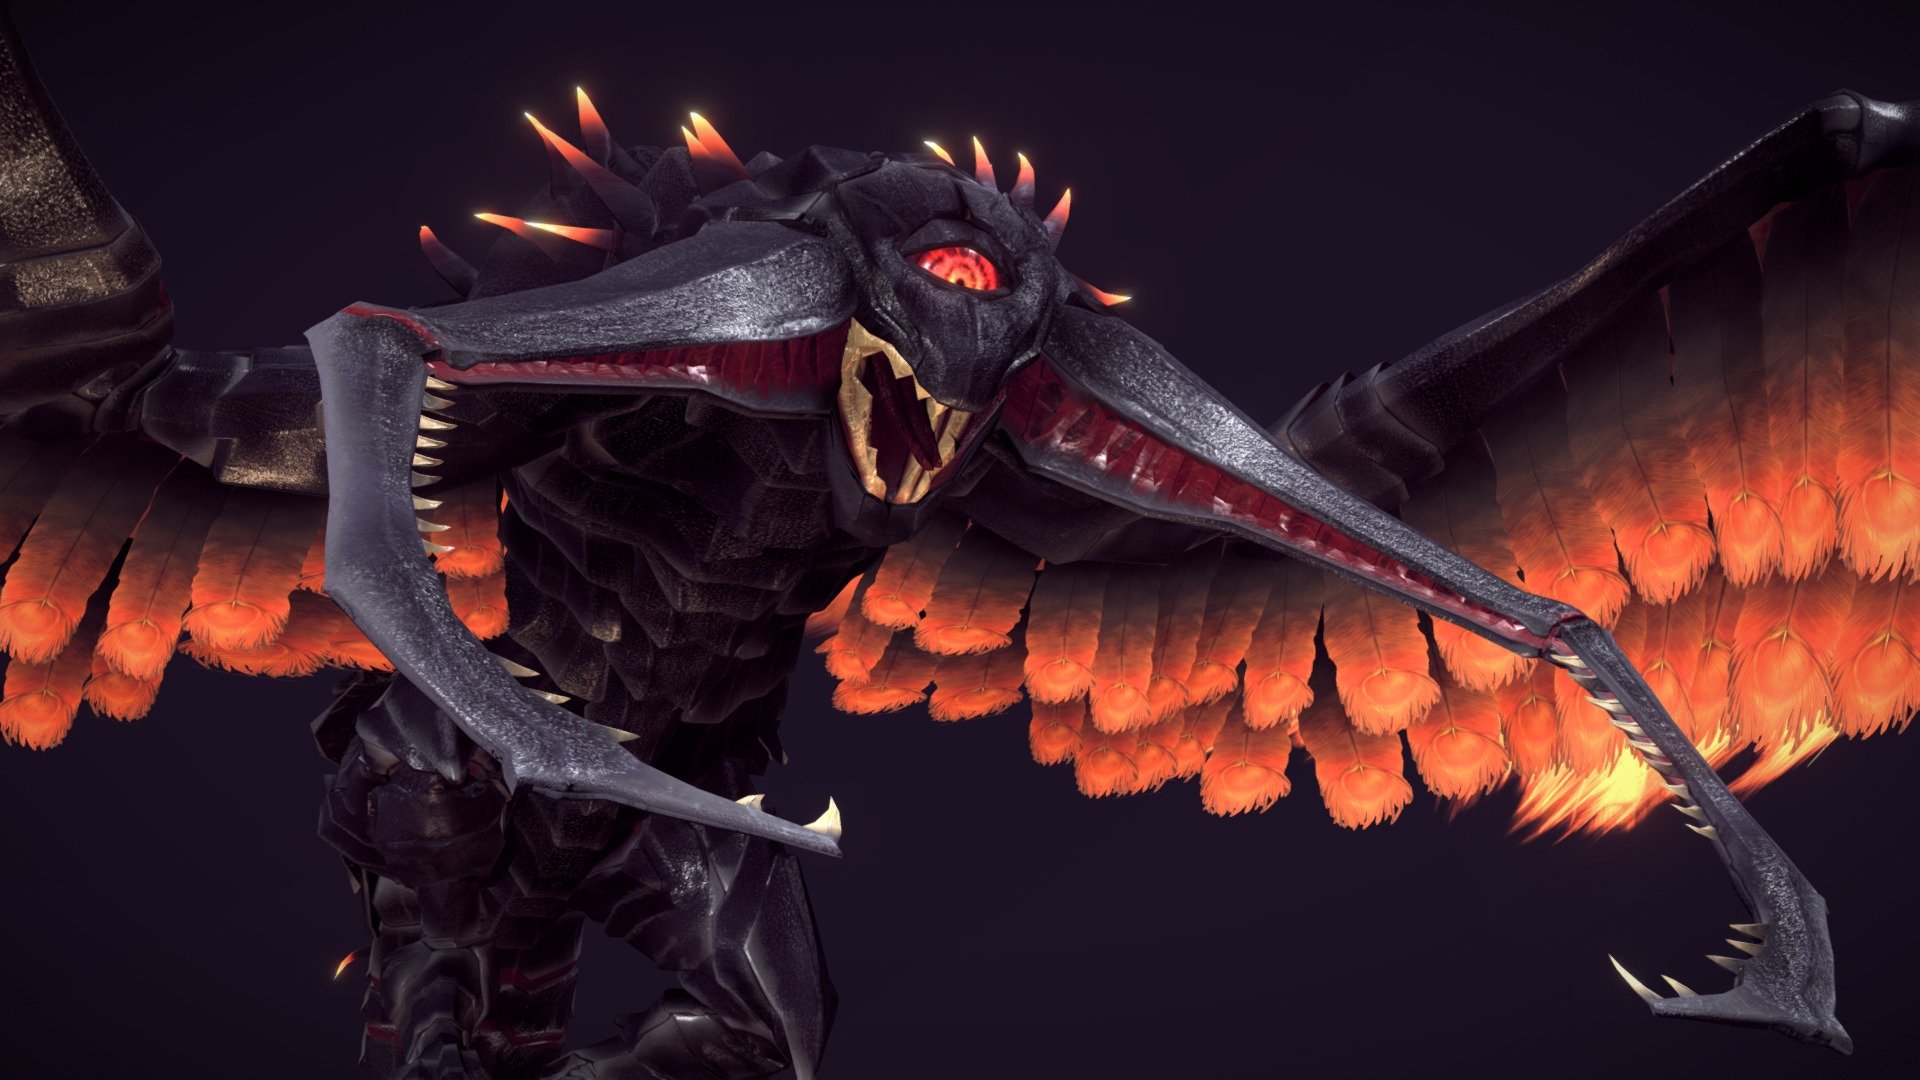 The flying nightmare ! It usually dwells in volcanic areas.
However it will look for tasty preys quite far from its nest. Watch the sky travelers !  - Death from above - 3D model by Thomas Veyrat (@veyratom) 3d model